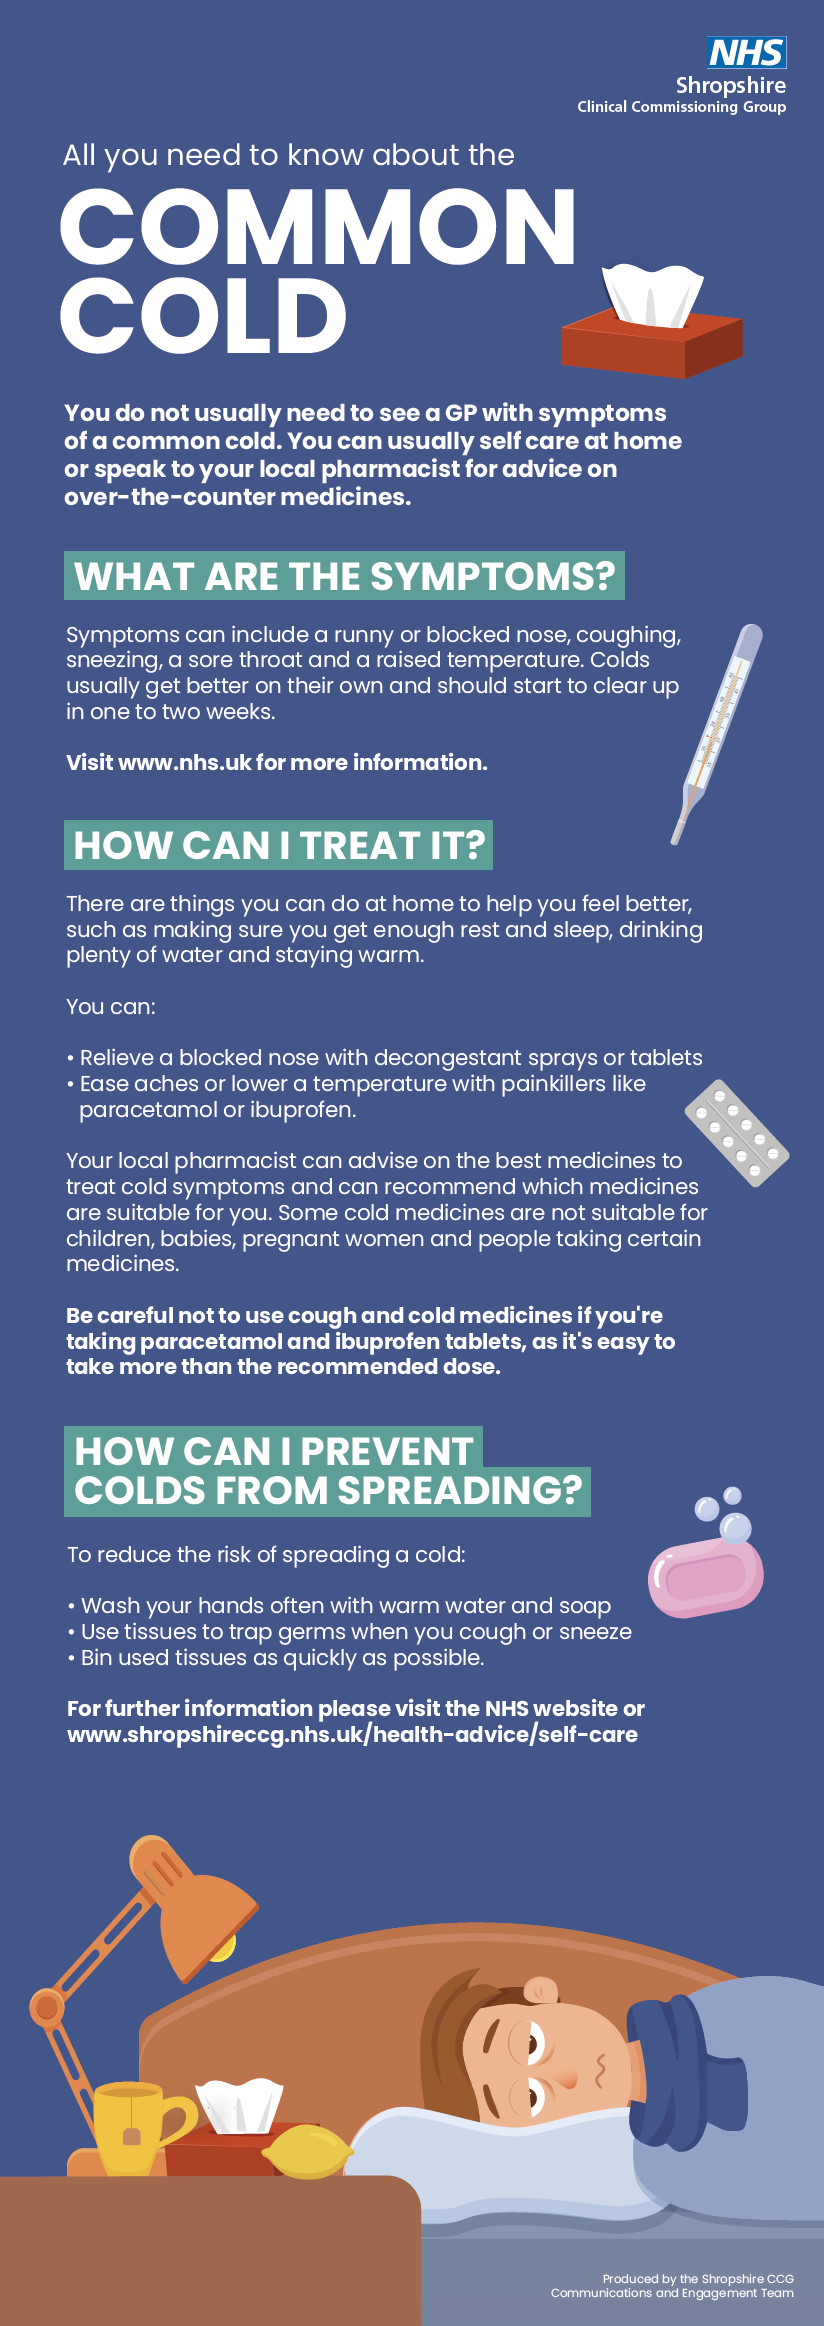 Common cold infographic